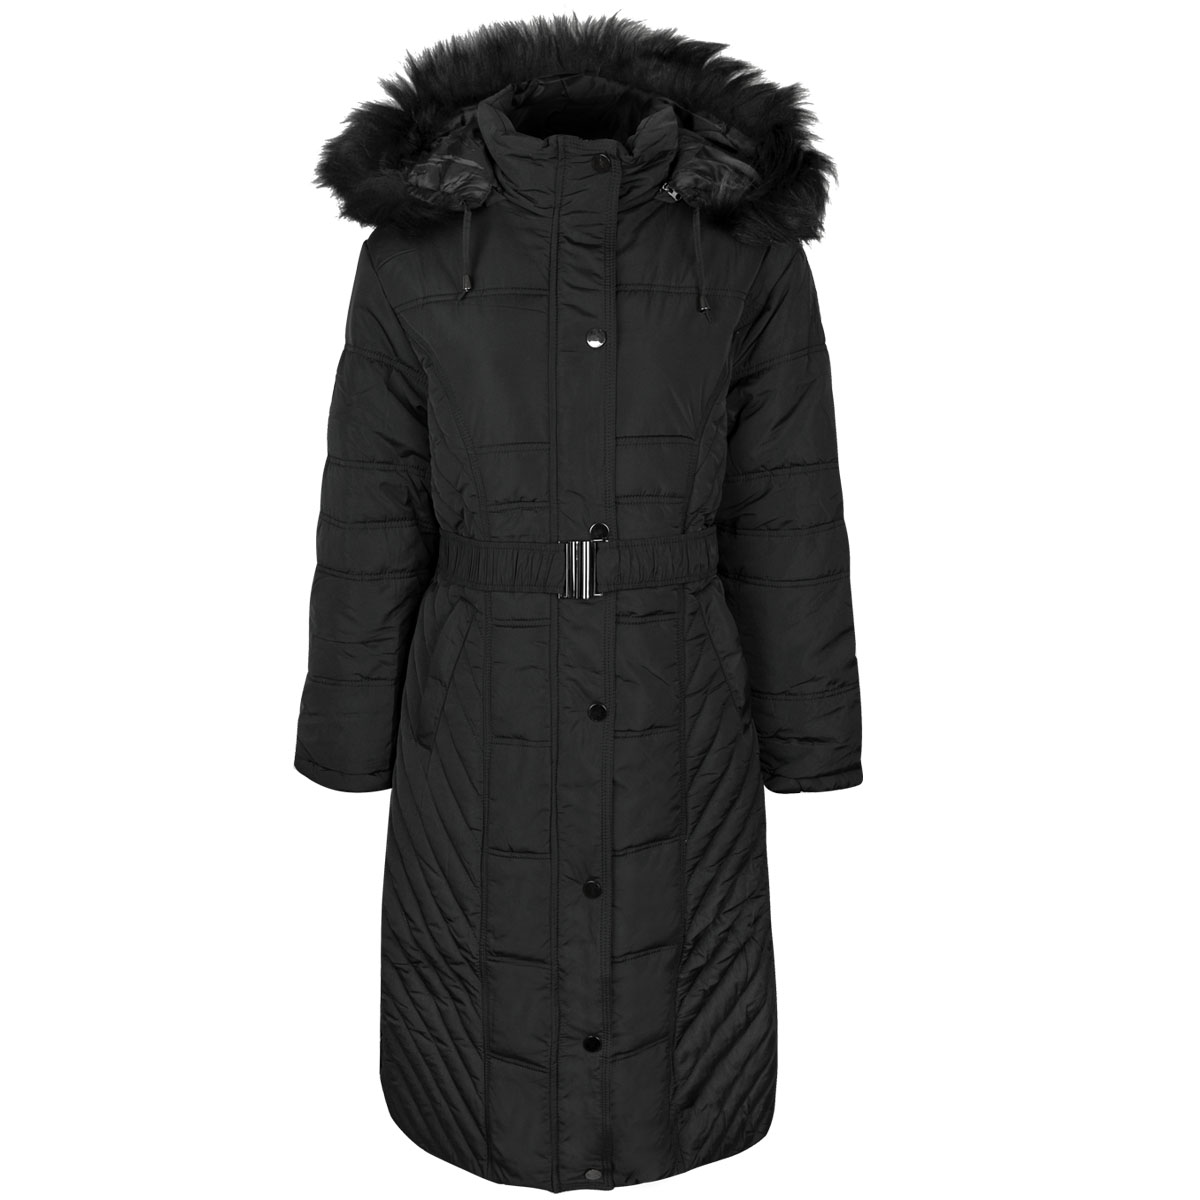 Womens Ladies Long Winter Coat Padded Quilted Puffa Jacket Fur Hooded